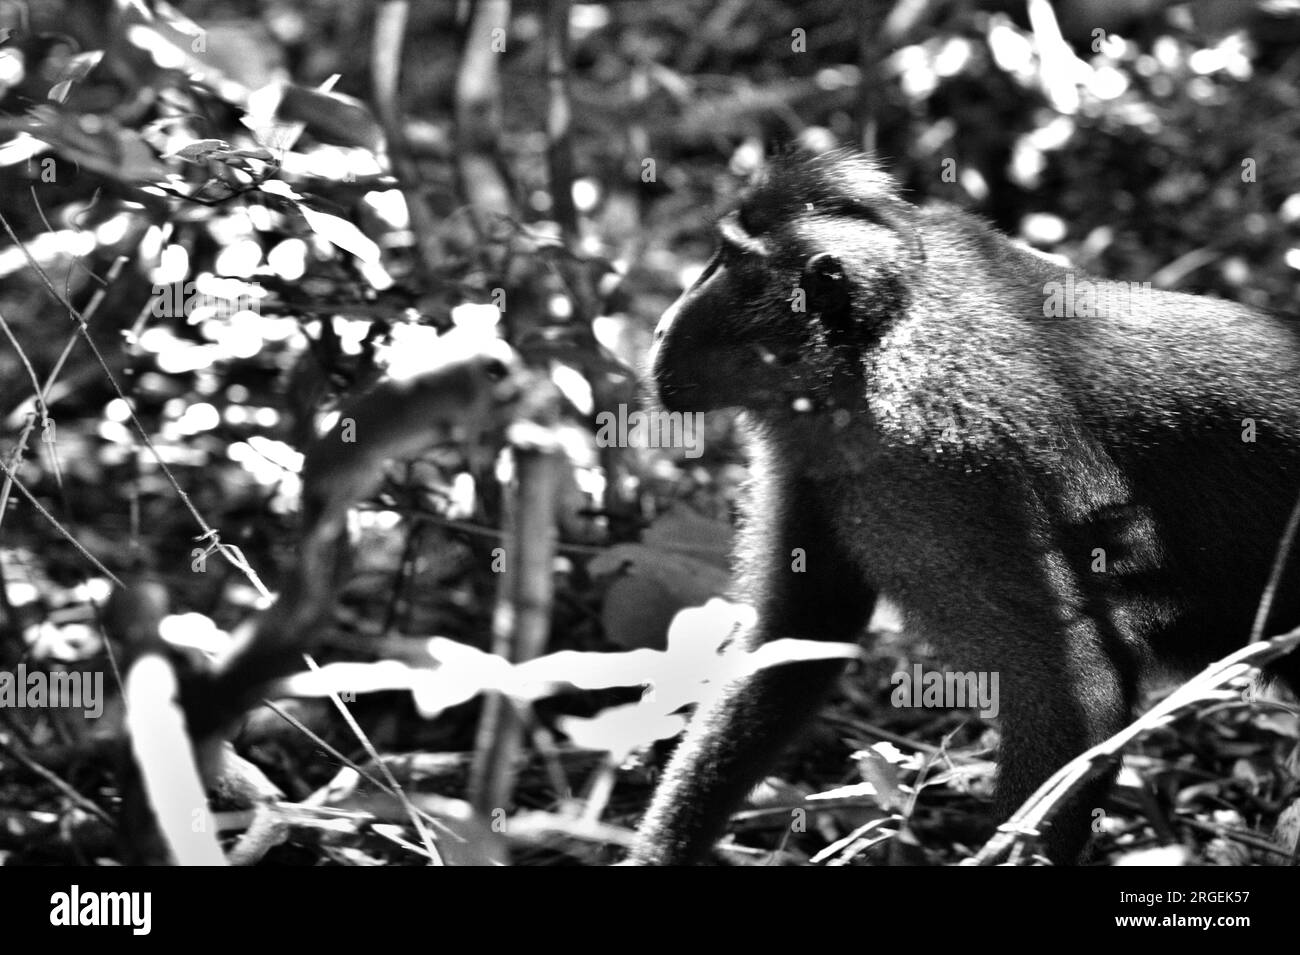 A crested macaque (Macaca nigra) is photographed as it is foraging on forest floor in Tangkoko forest, North Sulawesi, Indonesia. A recent report by a team of scientists led by Marine Joly revealed that temperature is increasing in Tangkoko forest, and the overall fruit abundance decreased. 'Between 2012 and 2020, temperatures increased by up to 0.2 degree Celsius per year in the forest, and the overall fruit abundance decreased by 1 percent per year,” they wrote on International Journal of Primatology in July 2023. Climate change and disease are emerging threats to primates. Stock Photo